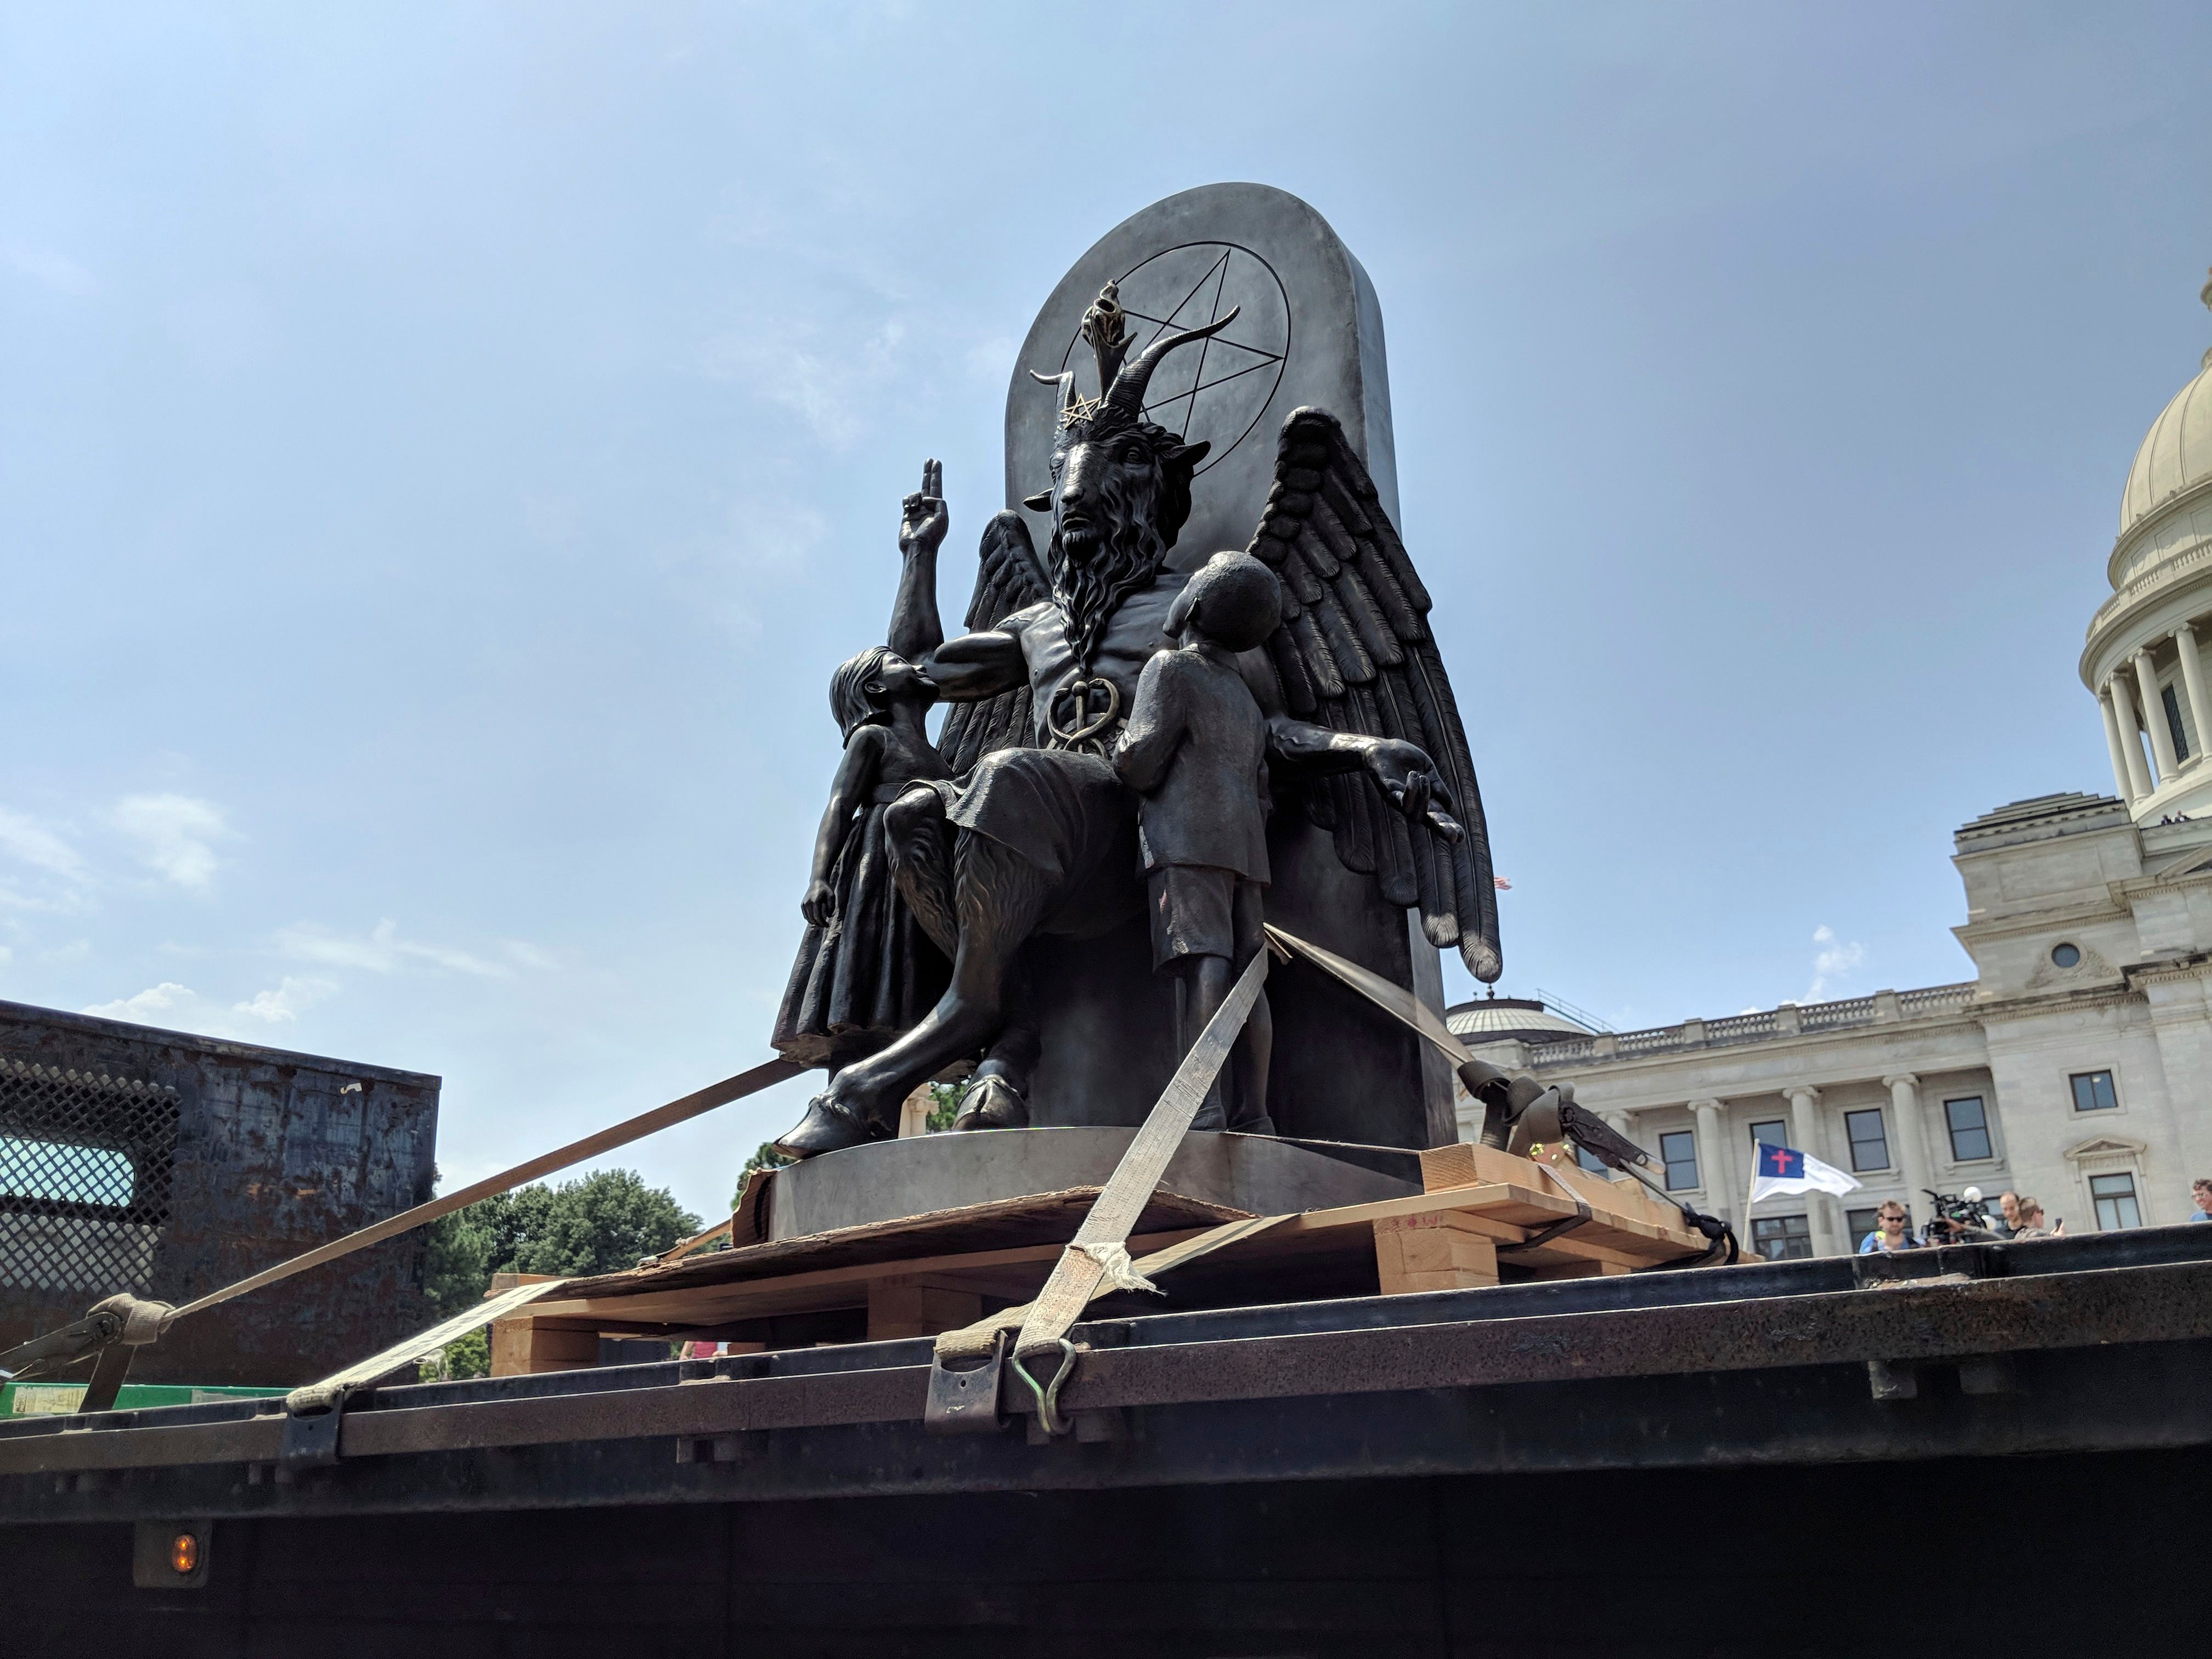 The Satanic Temple unveils its statue of Baphomet, a winged-goat creature, at a rally for the first amendment in Little Rock, Ark. on Aug. 16, 2018. (Hannah Grabenstein/AP/REX/Shutterstock)